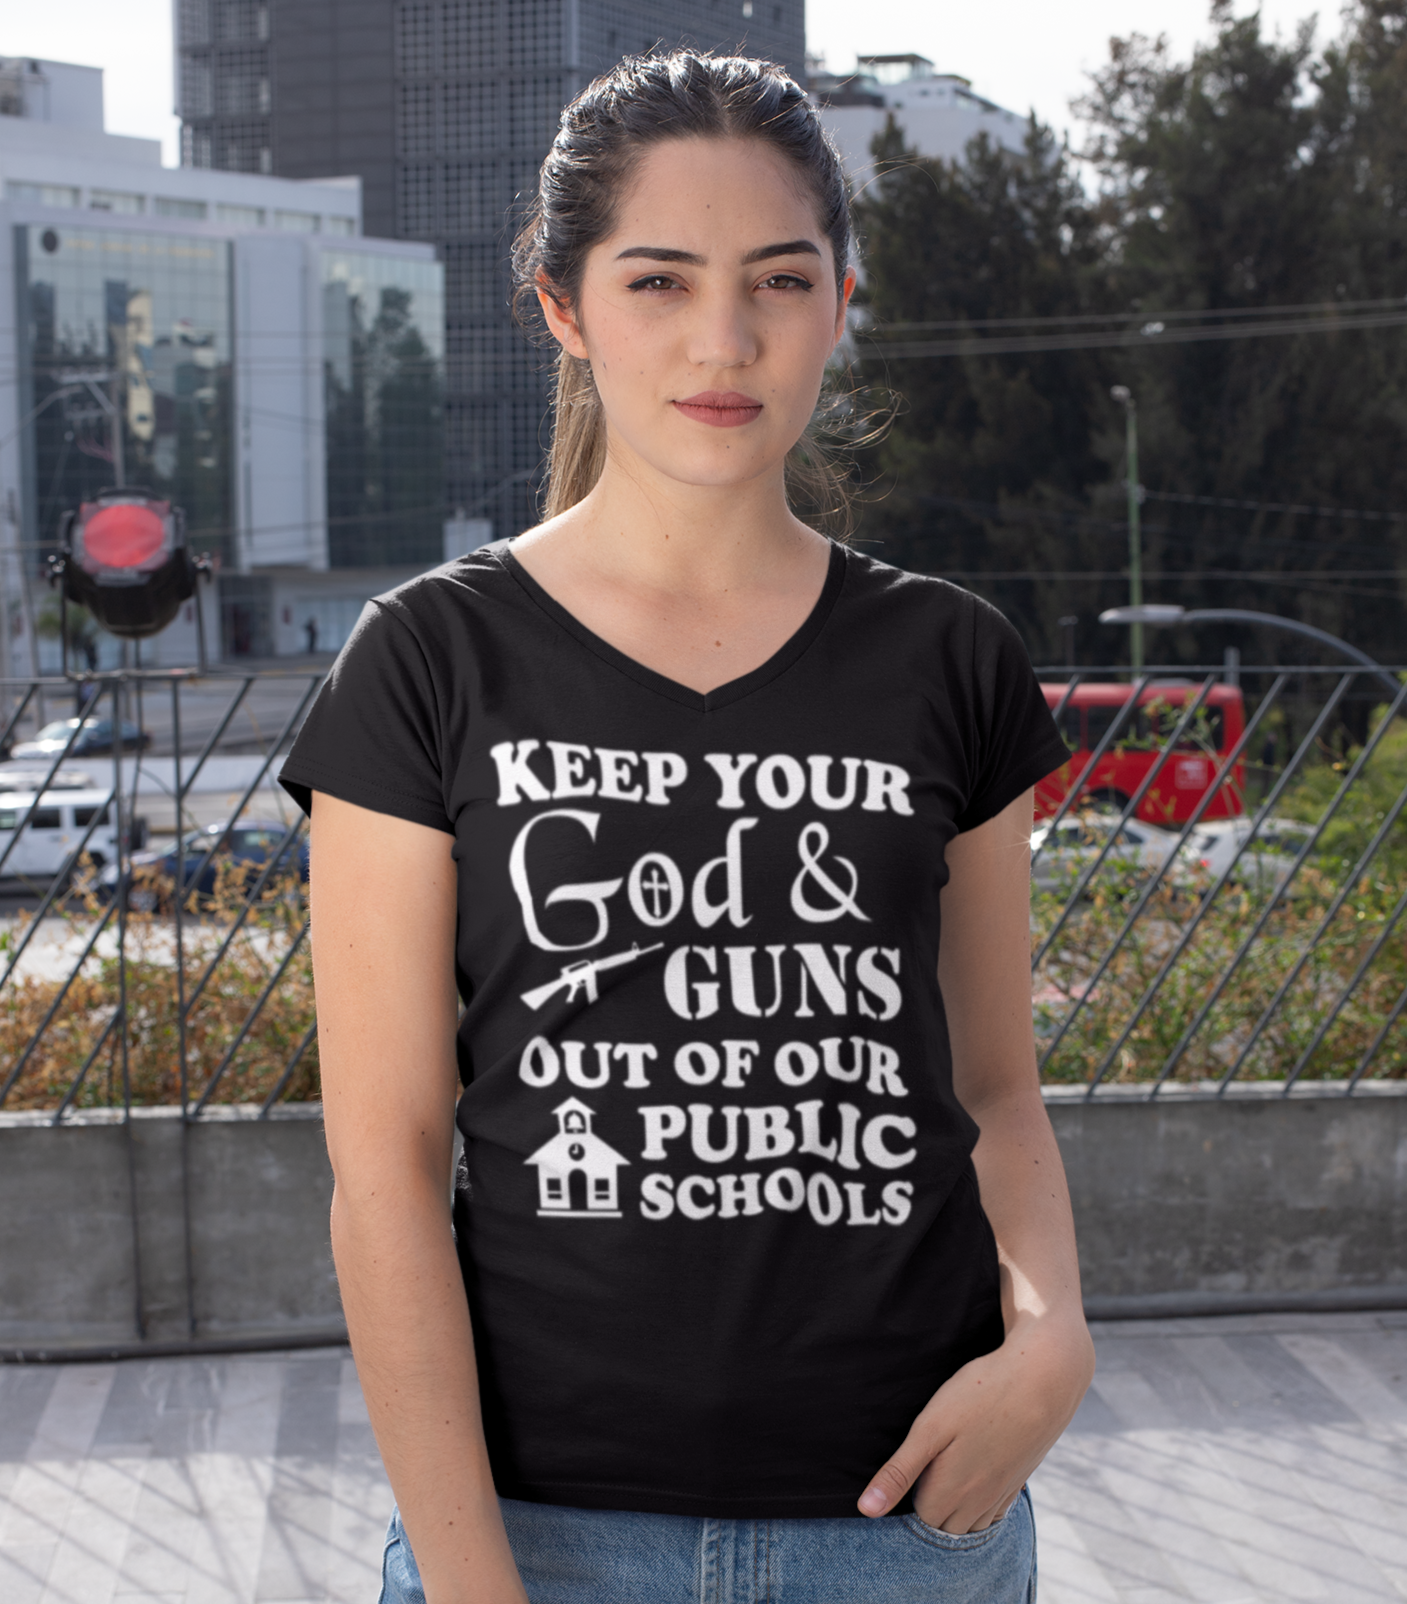 Woman wearing black v-neck shirt with stylized imprint that says  Keep Your God and guns ou too our public schools